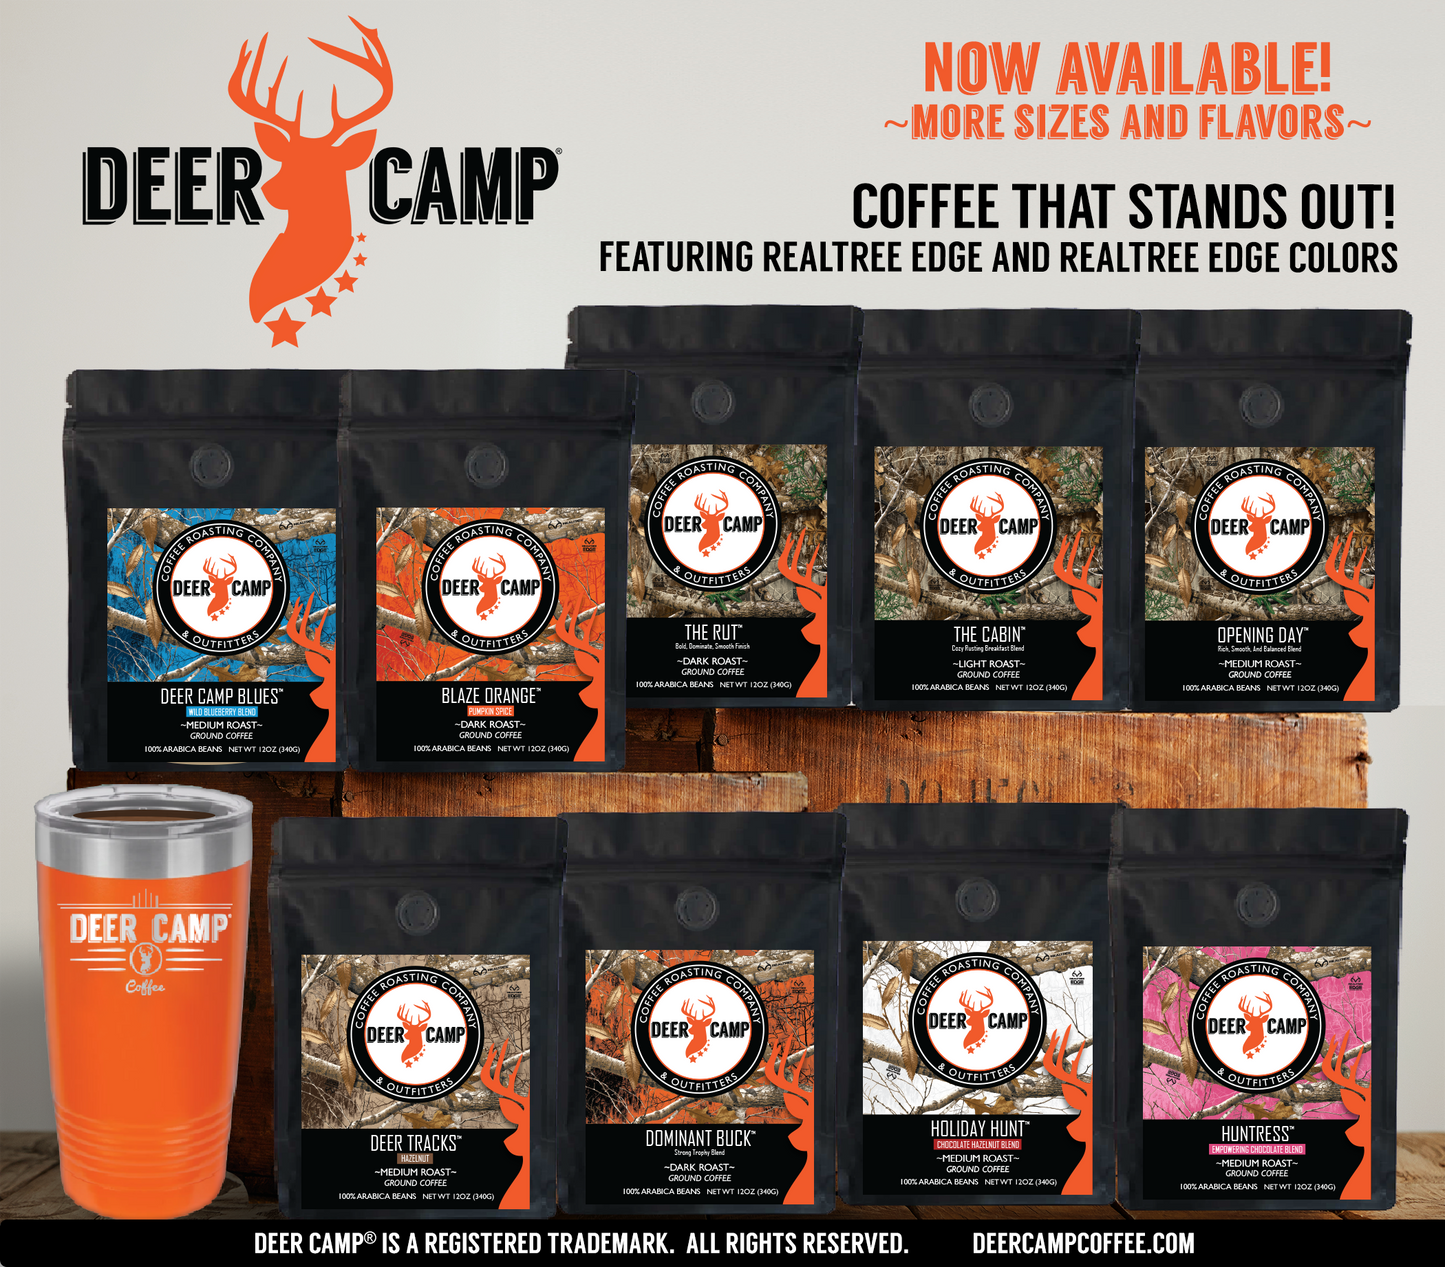 DEER CAMP® Opening Day™ Decaffeinated Featuring REALTREE